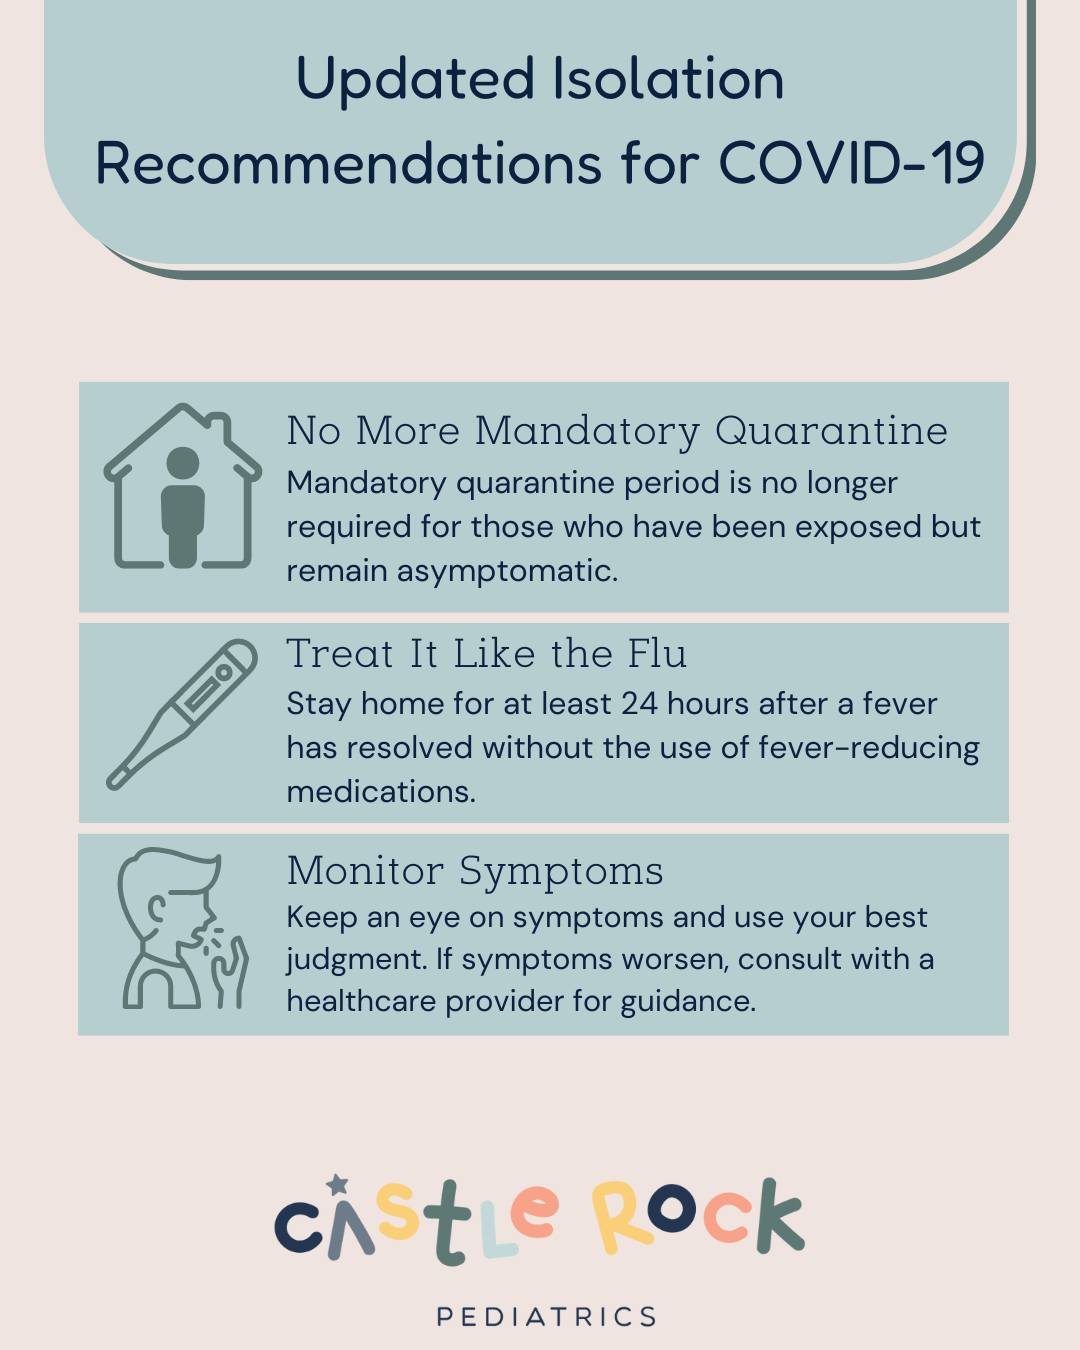 Navigating the New COVID-19 Isolation Guidelines 

With the ever-evolving situation surrounding COVID-19, staying informed is key to keeping our communities safe and healthy. The latest guidelines bring a significant change, aligning more closely wit